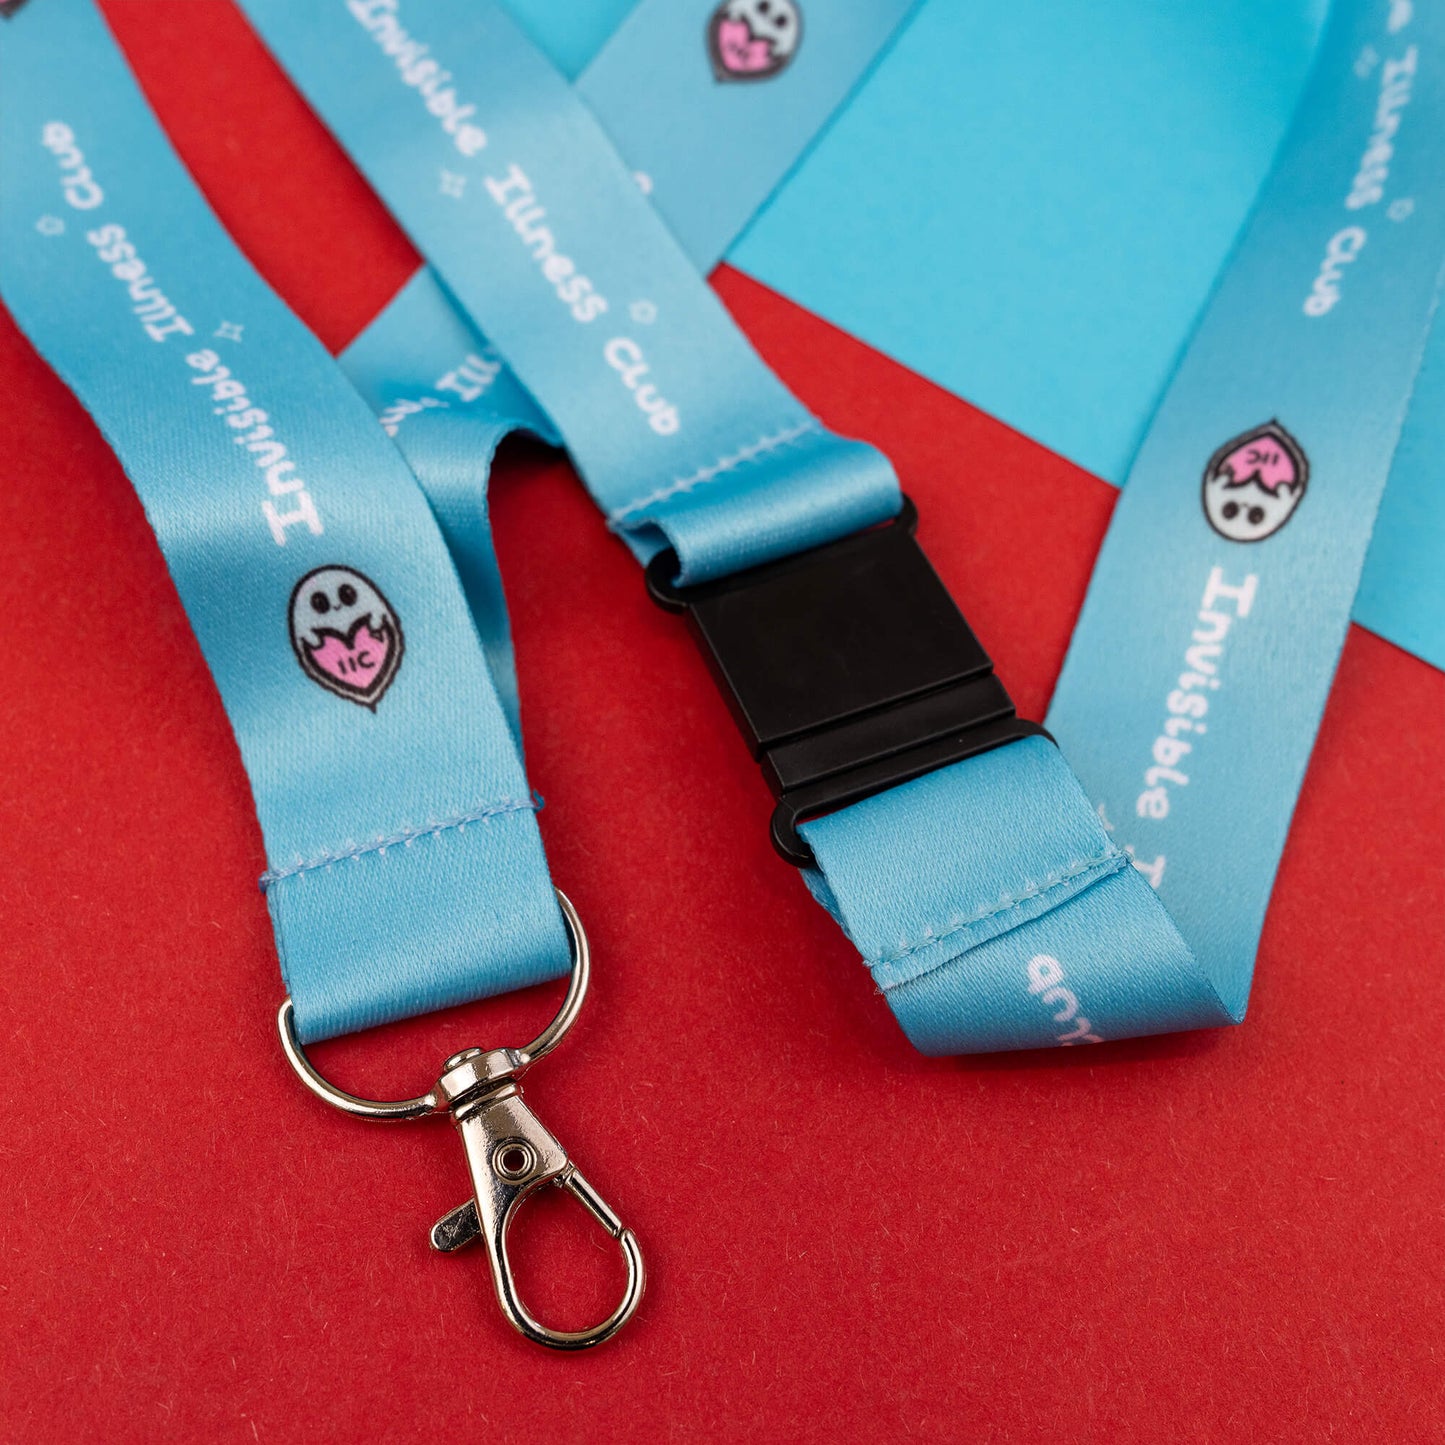 Lanyard with a black buckle and metal clasp, displaying the 'Invisible Illness Club' text and a cute ghost logo. This light blue lanyard is designed to raise awareness for invisible illnesses and is arranged on a red and blue geometric background.